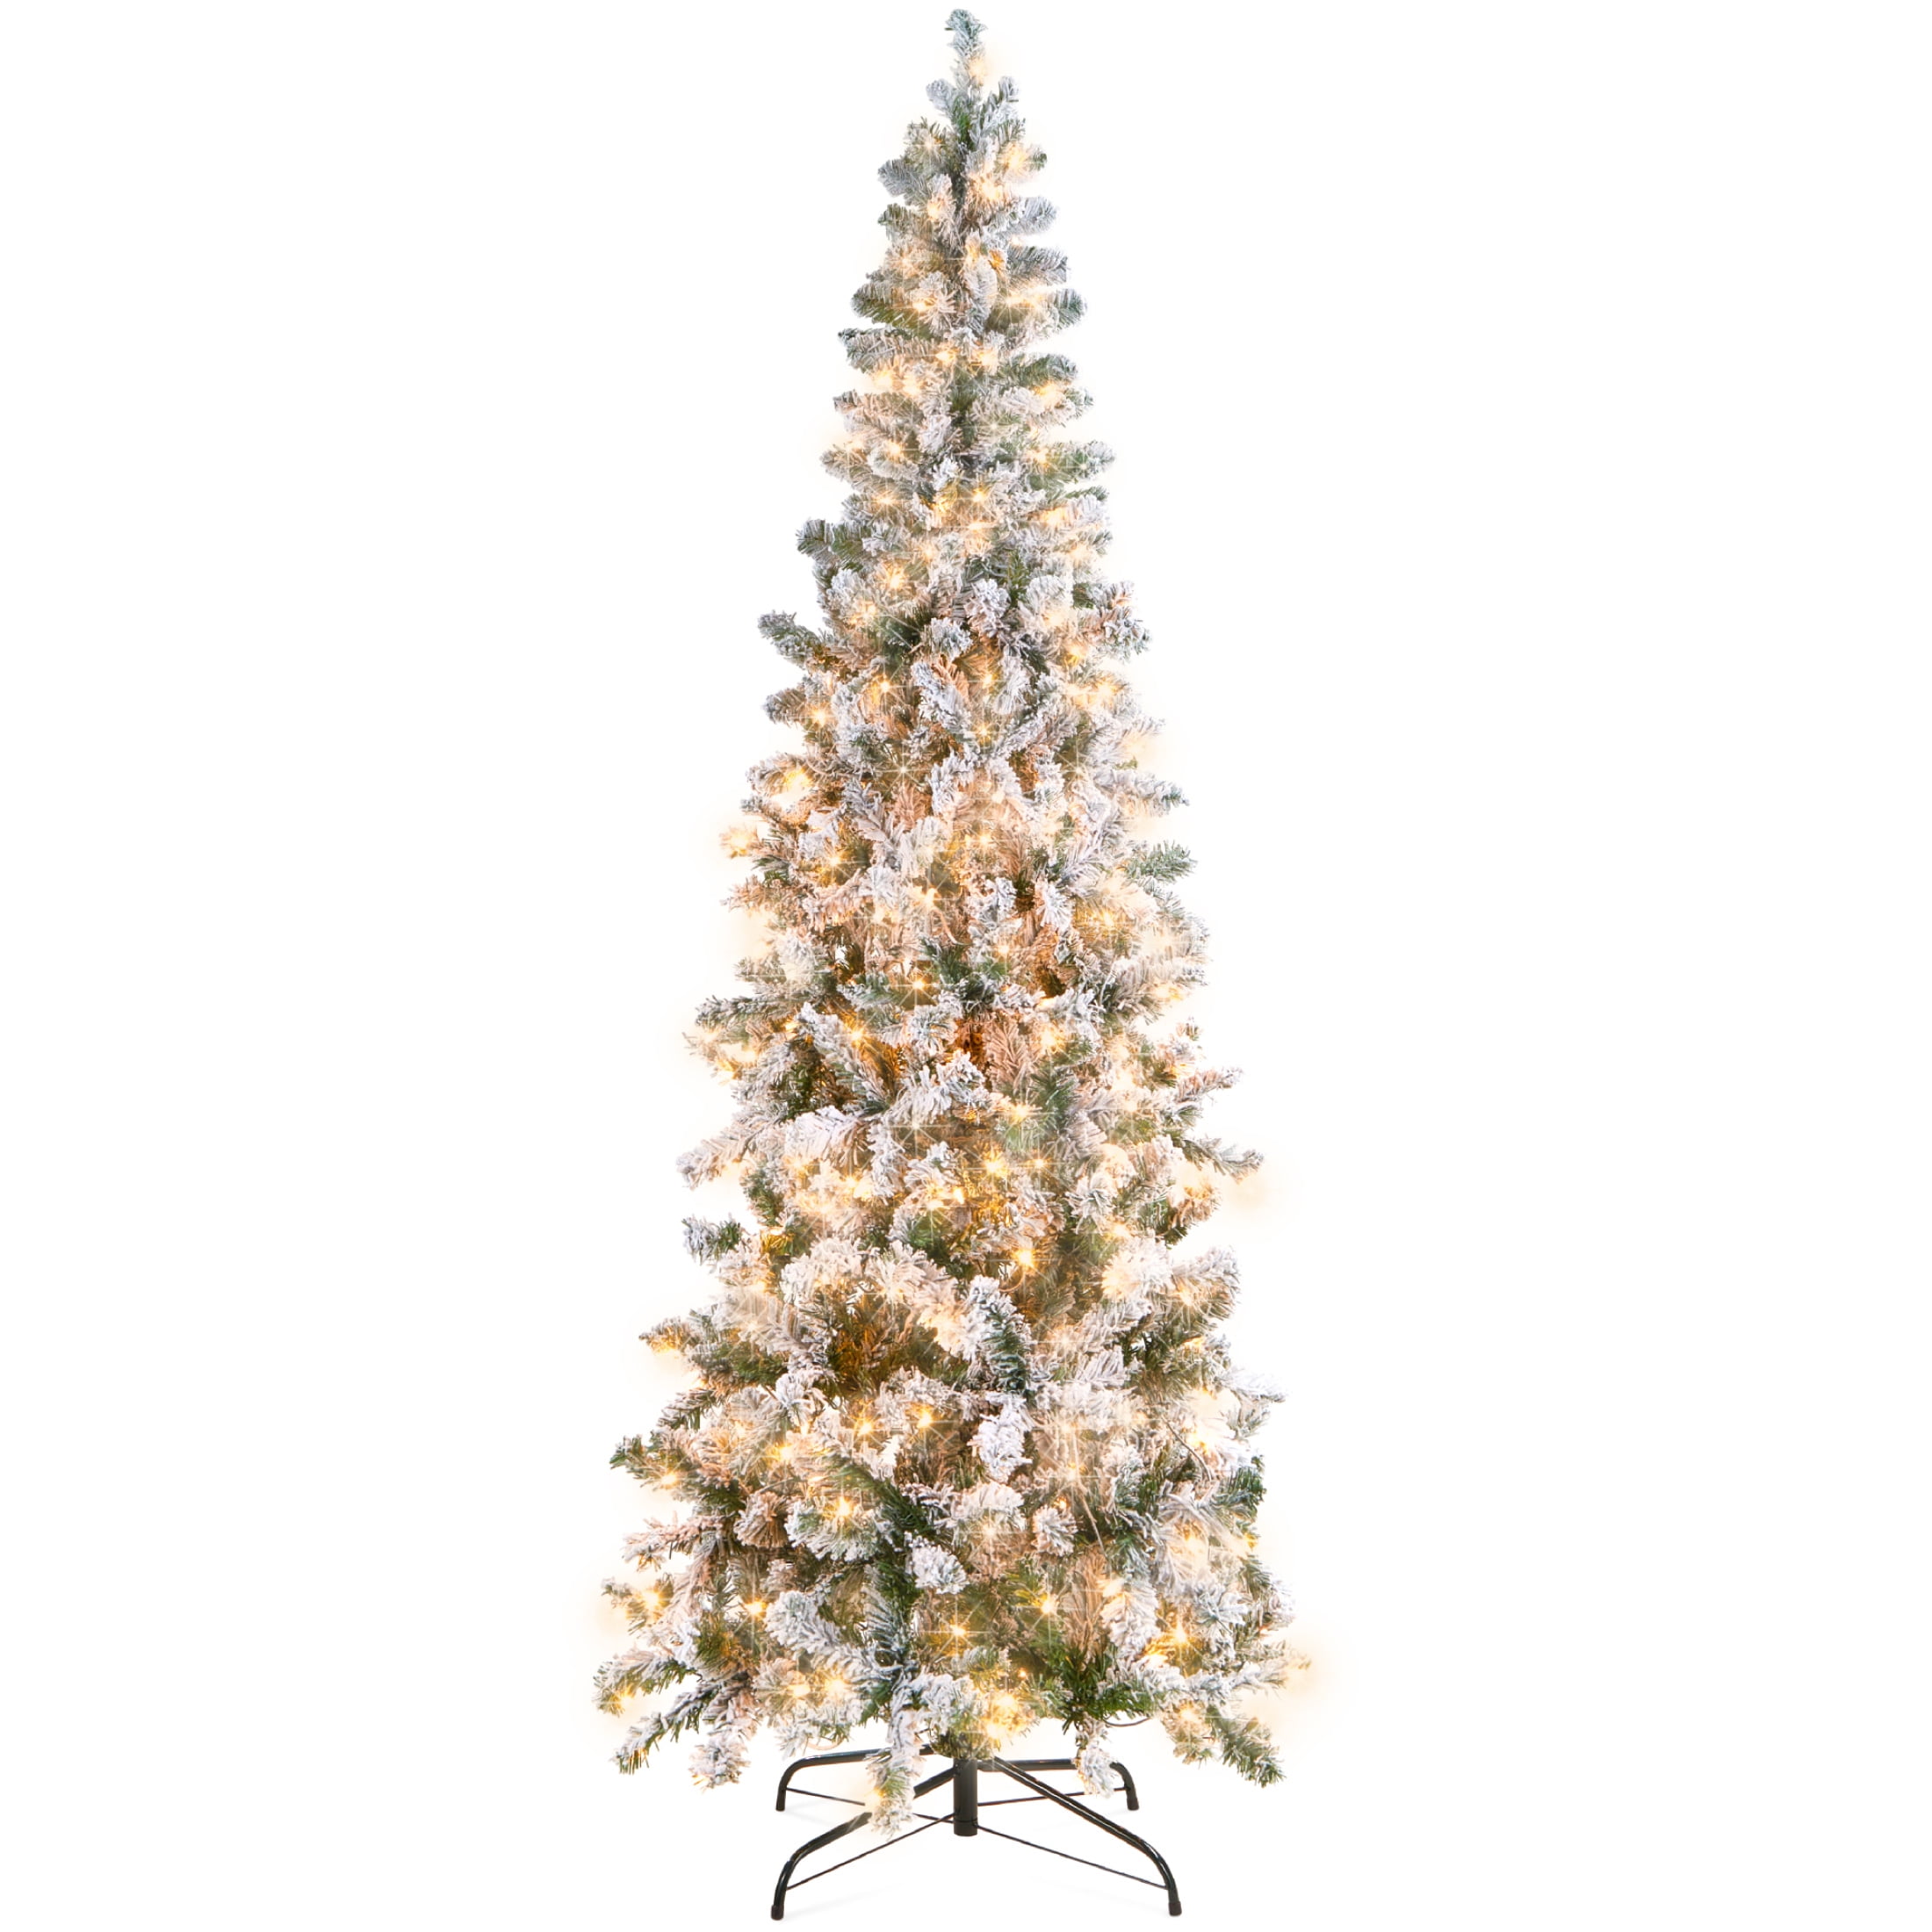 himaly 6feet Christmas Tree Artificial,720Tips Snow Flocked Christmas Pine Tree with Metal Stand,52Pine Cone,52Red Berries,Perfect for Xmas Decoration Indoor/Outdoor Holiday